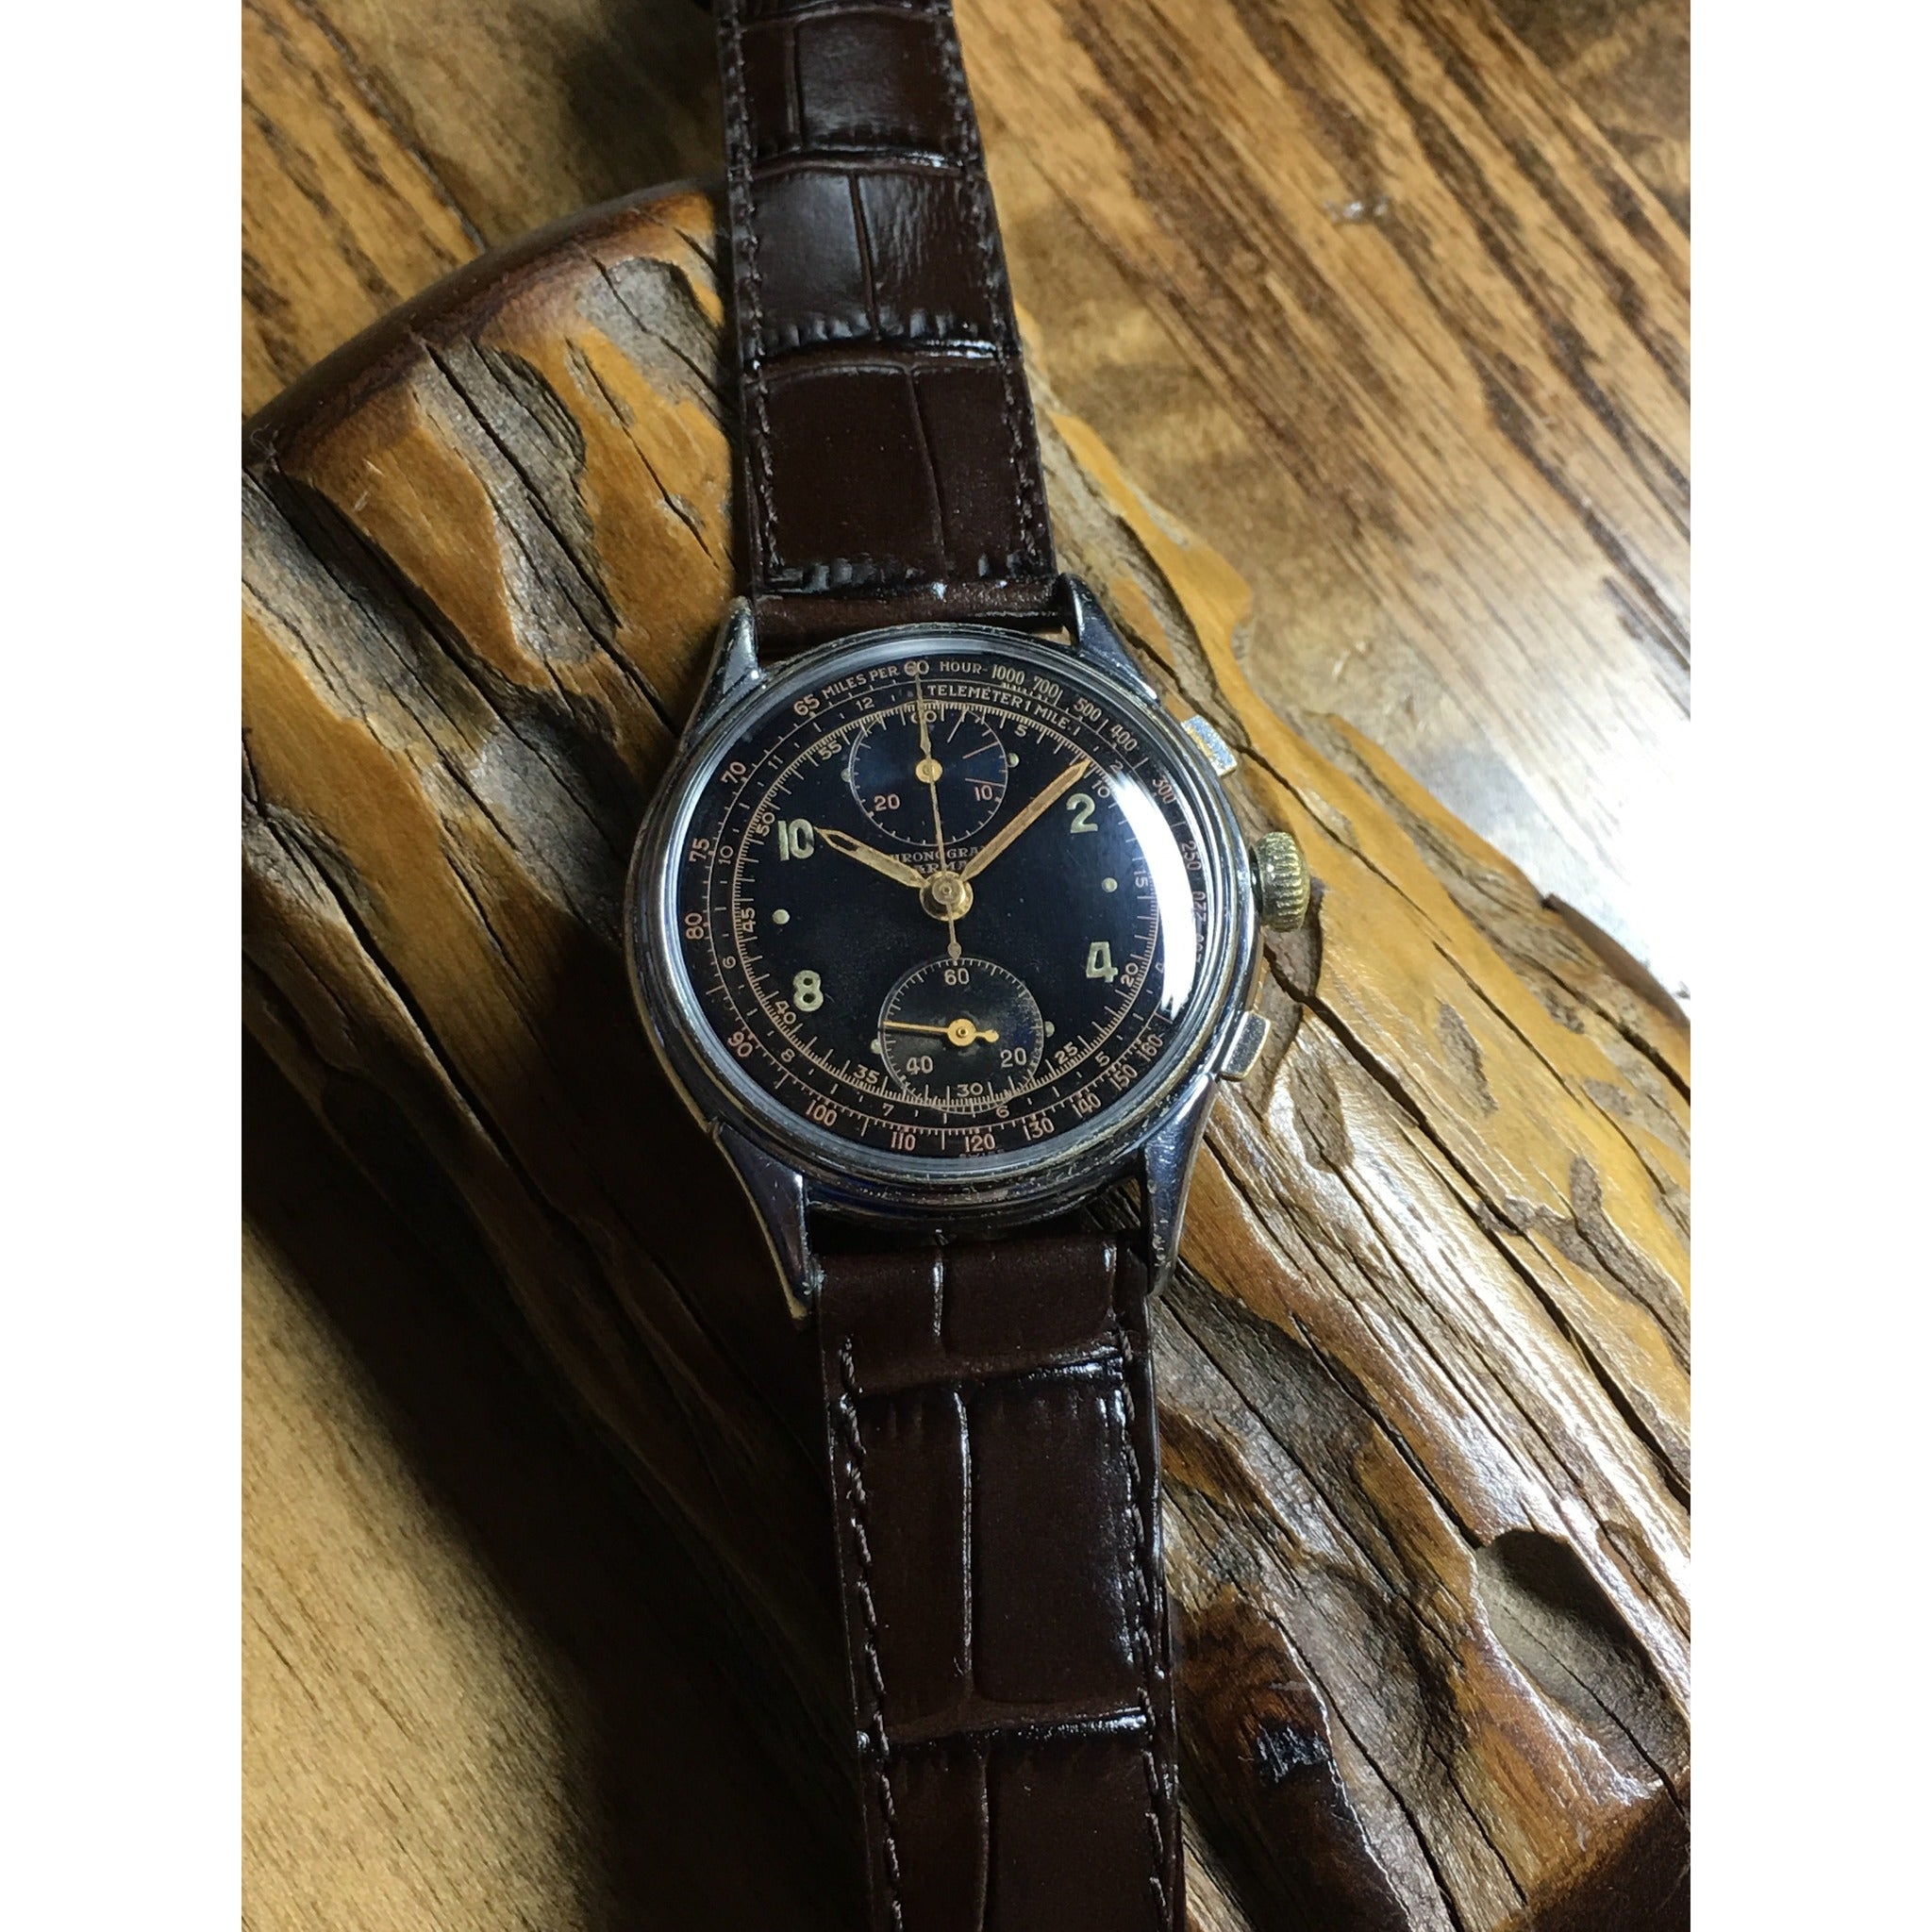 OMEGA Watches for sale in Hawi, Hawaii | Facebook Marketplace | Facebook